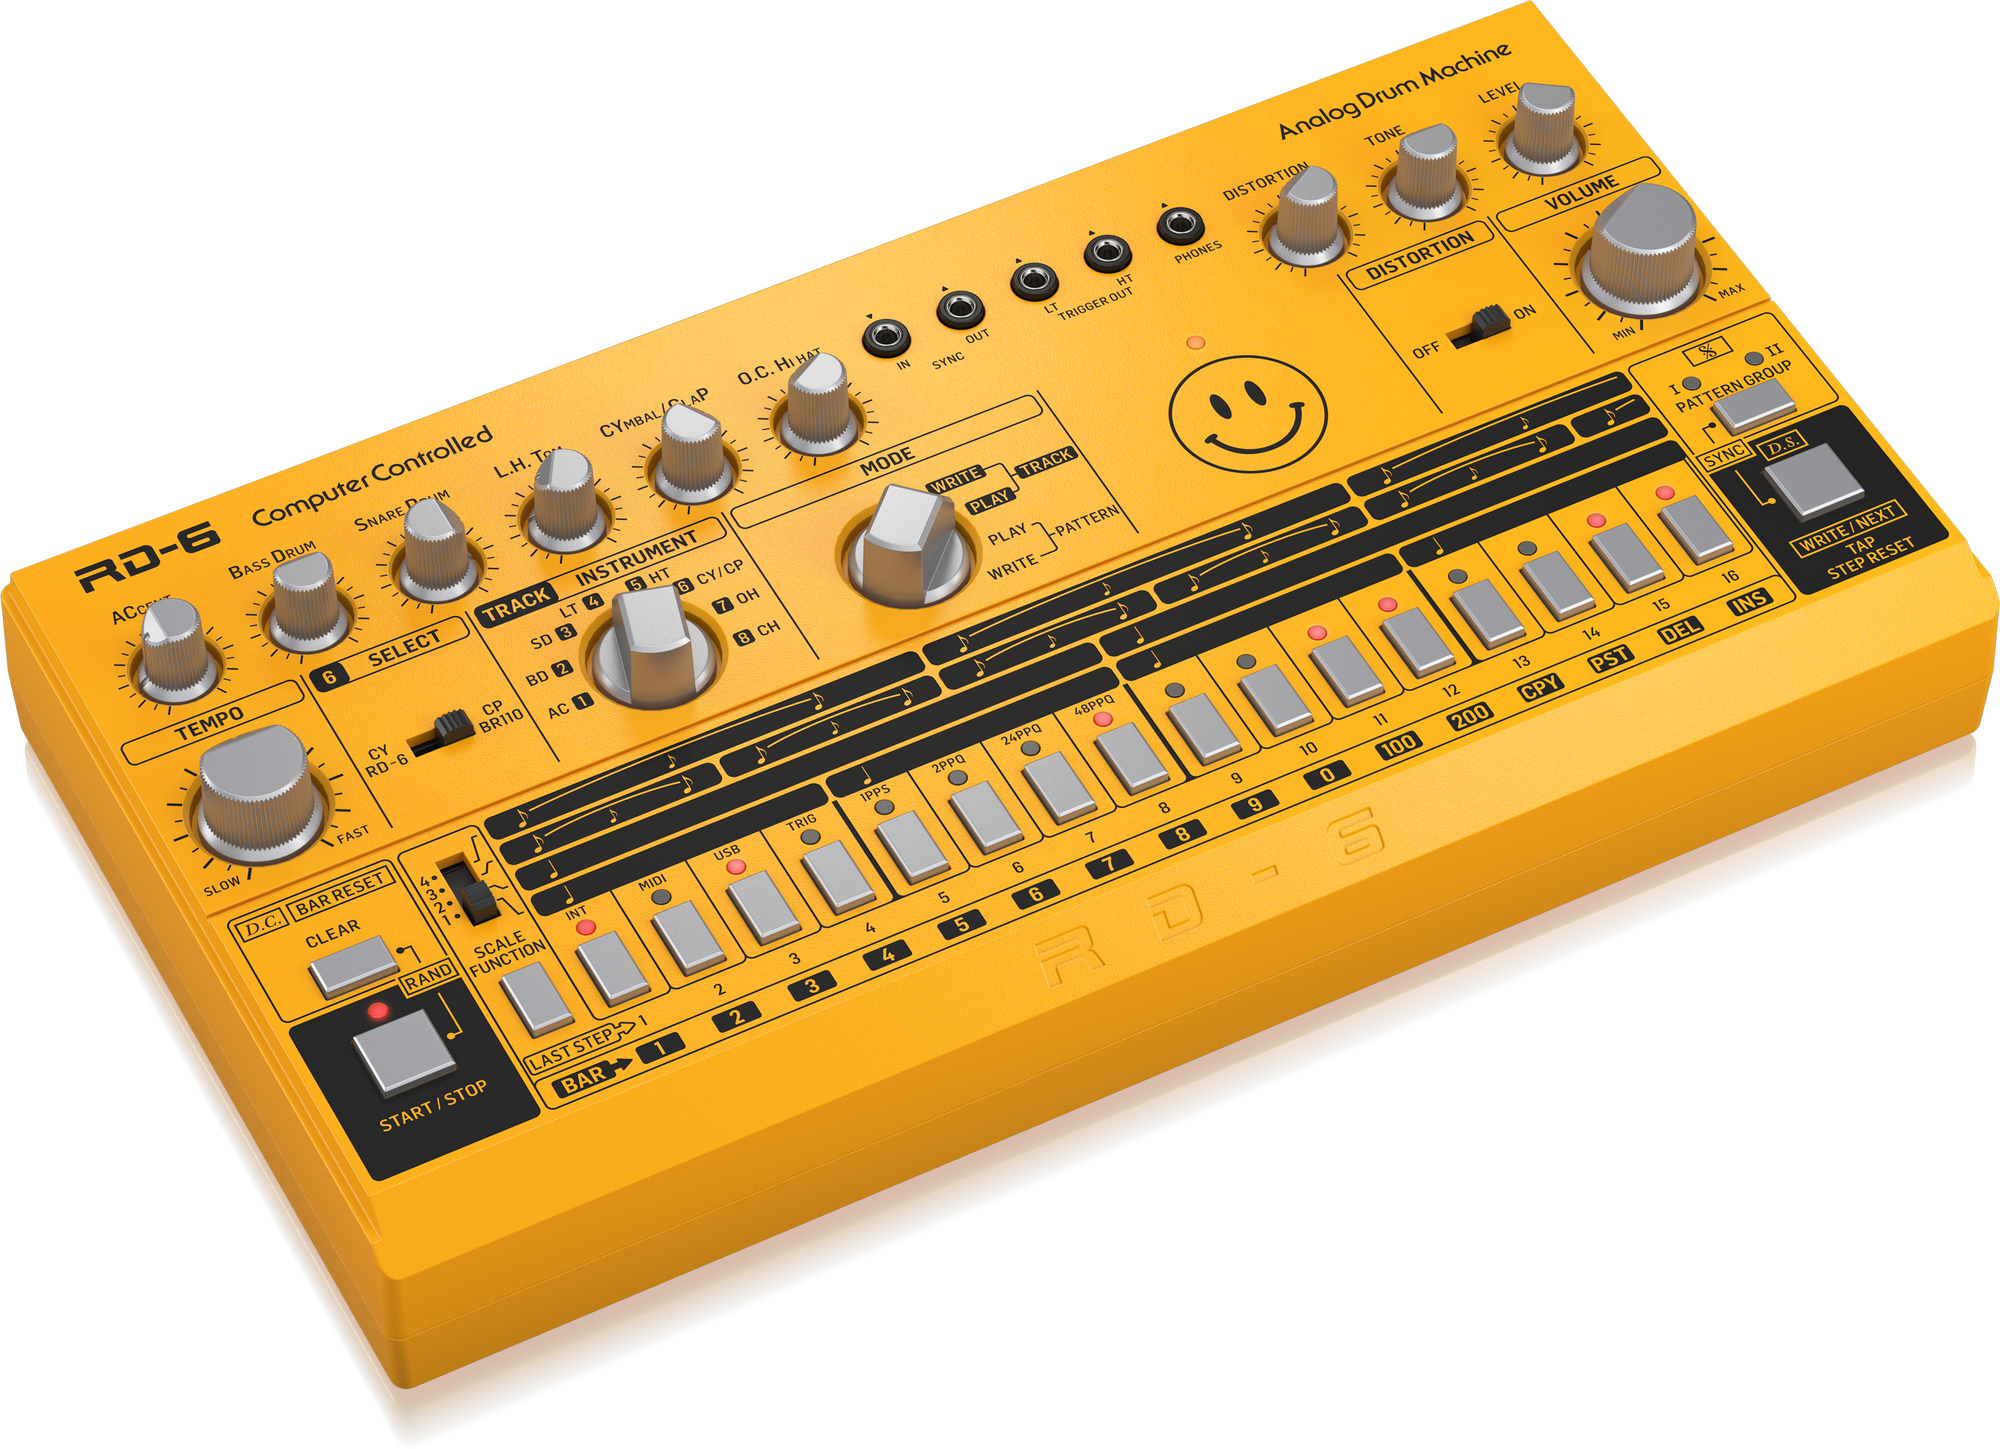 Behringer | Product | RD-6-AM